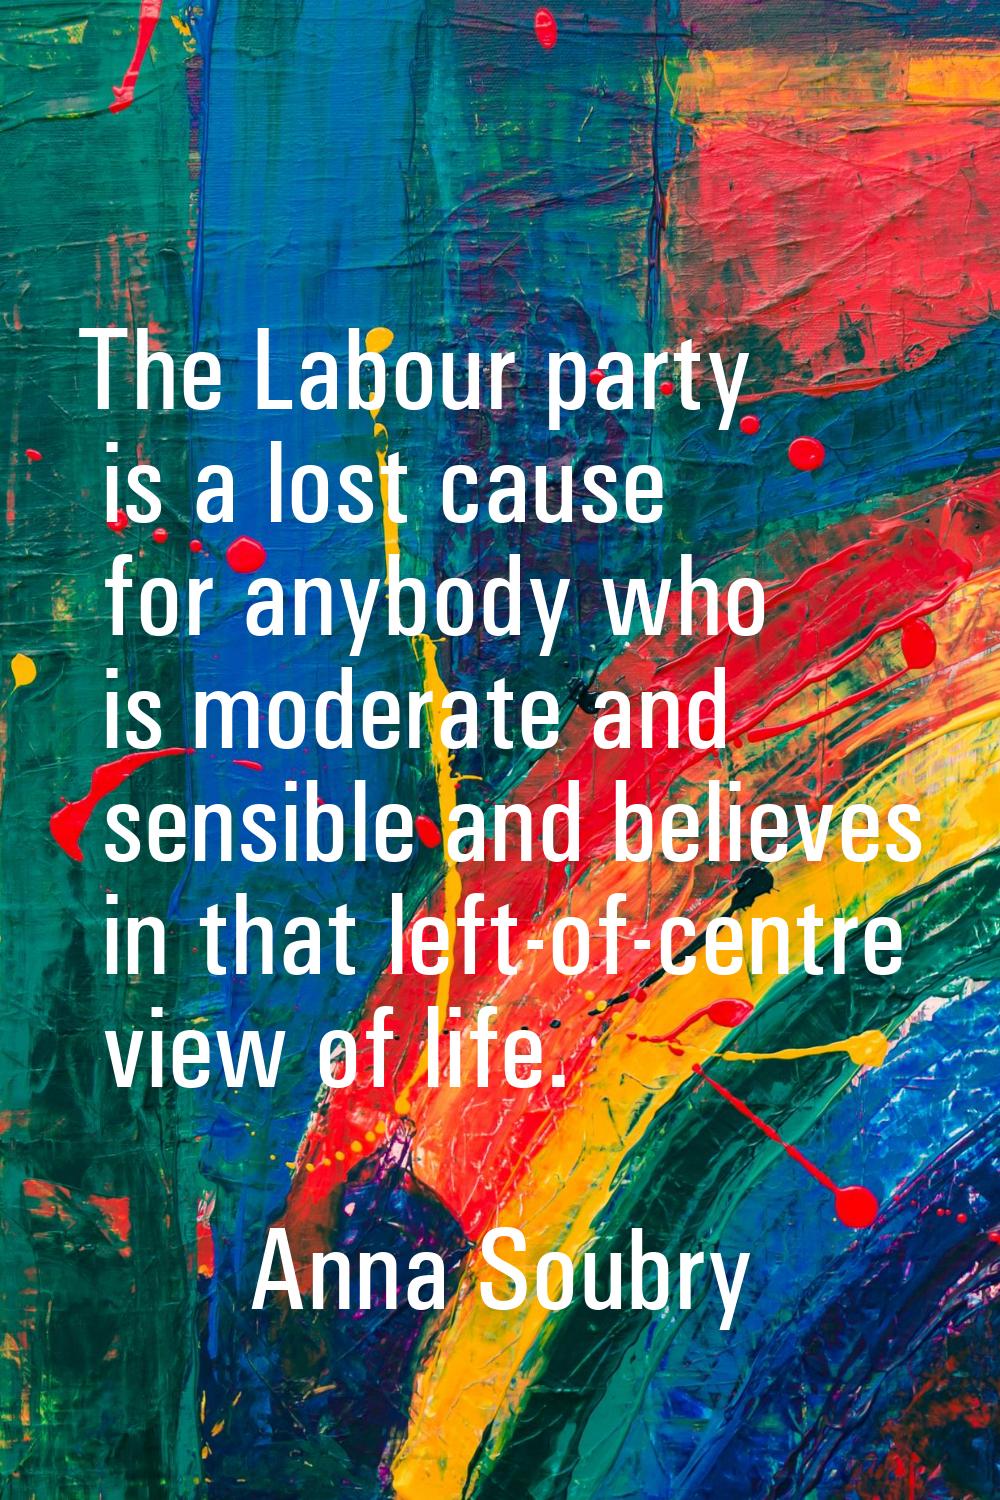 The Labour party is a lost cause for anybody who is moderate and sensible and believes in that left